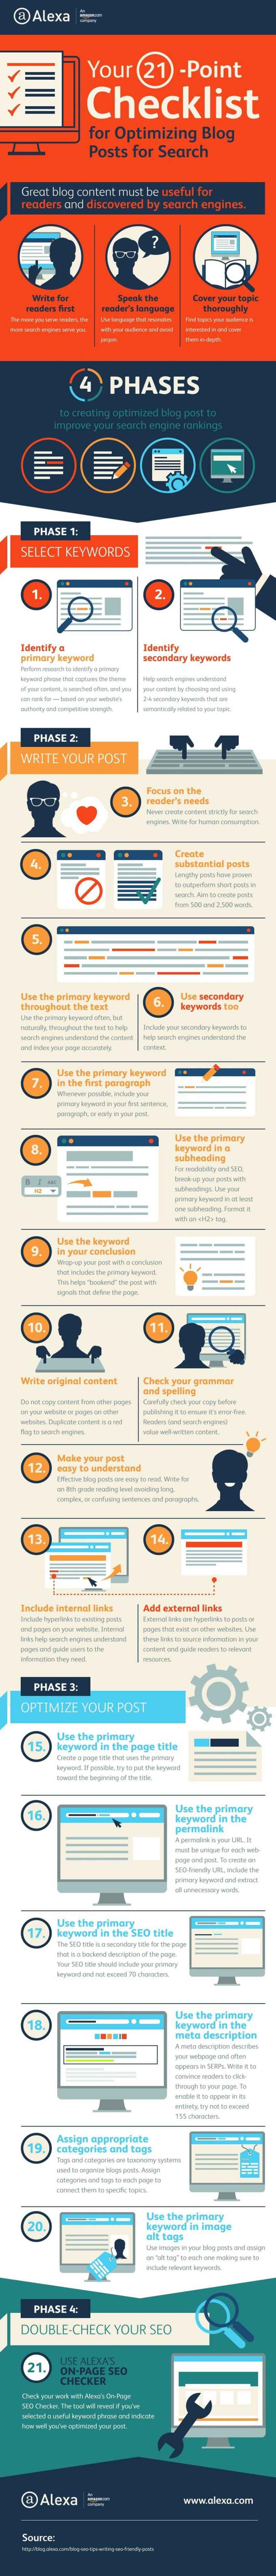 Your 21-Point Blog Post Search Optimization Checklist [Infographic] - Convince and Convert | The MarTech Digest | Scoop.it